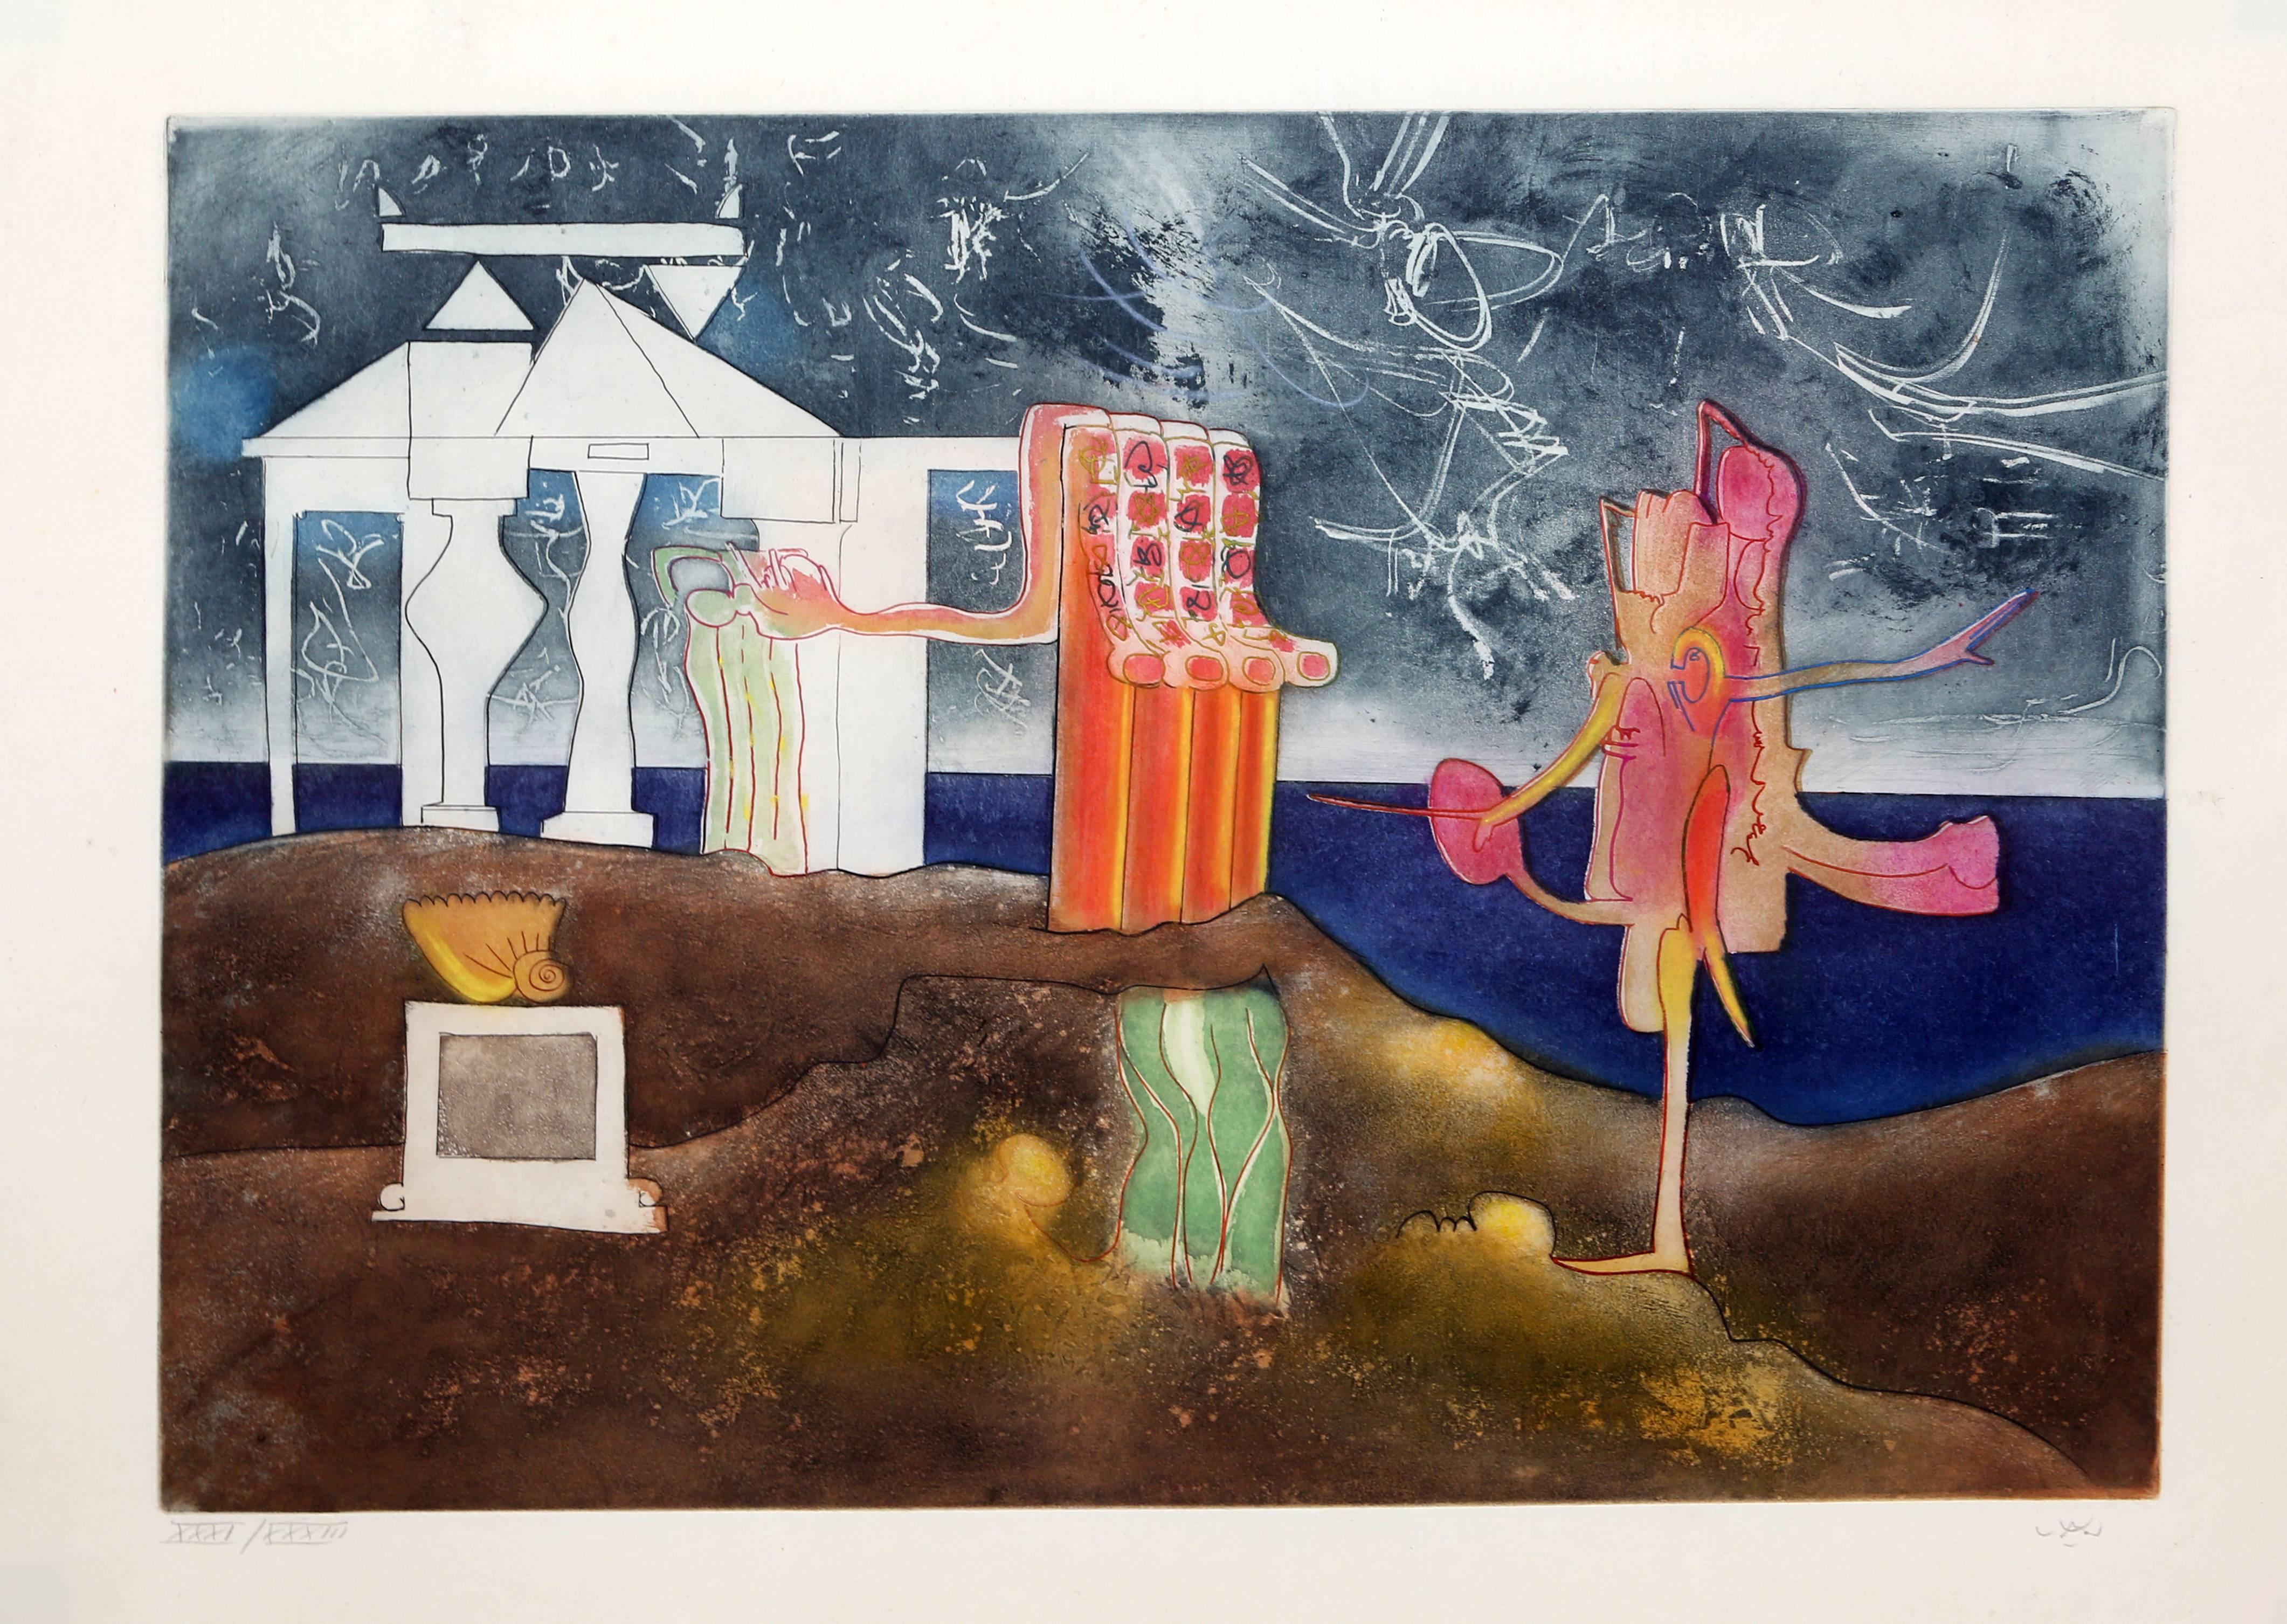 Roberto Matta Figurative Print - 12 PM from L'Arc Obscur des Heures